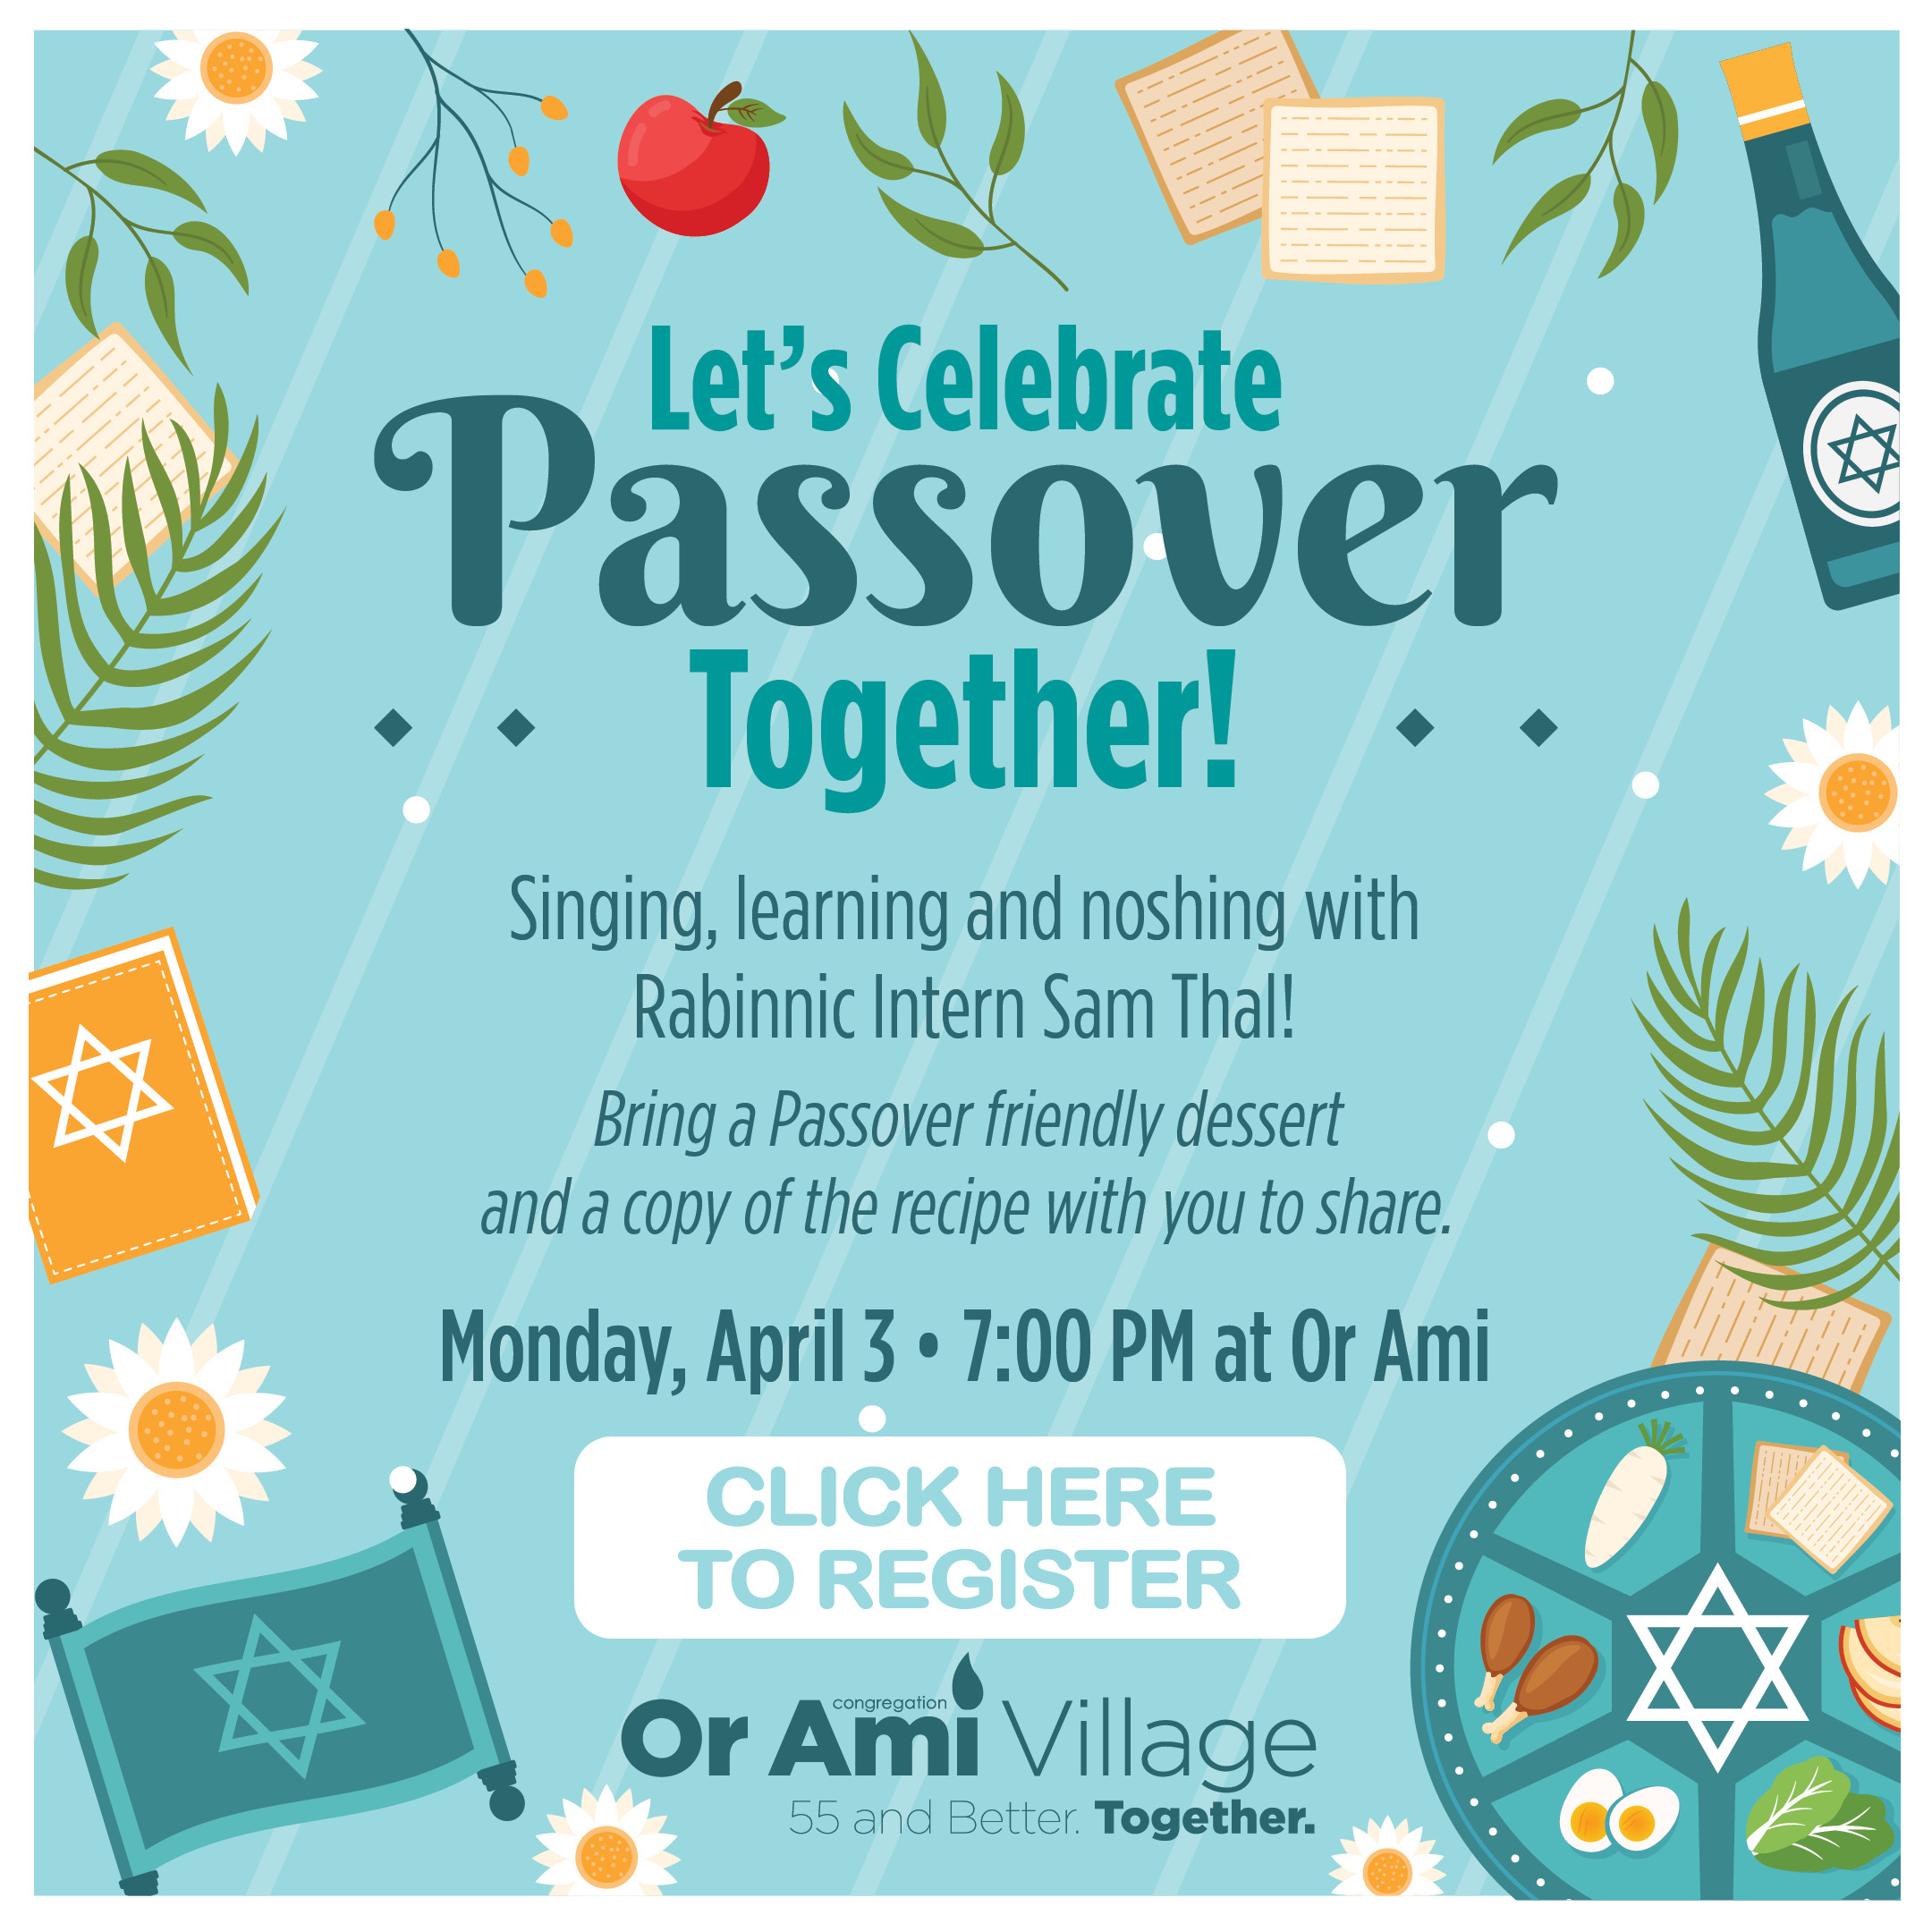 Or Ami Village Let's Celebrate Passover Together with CLICK